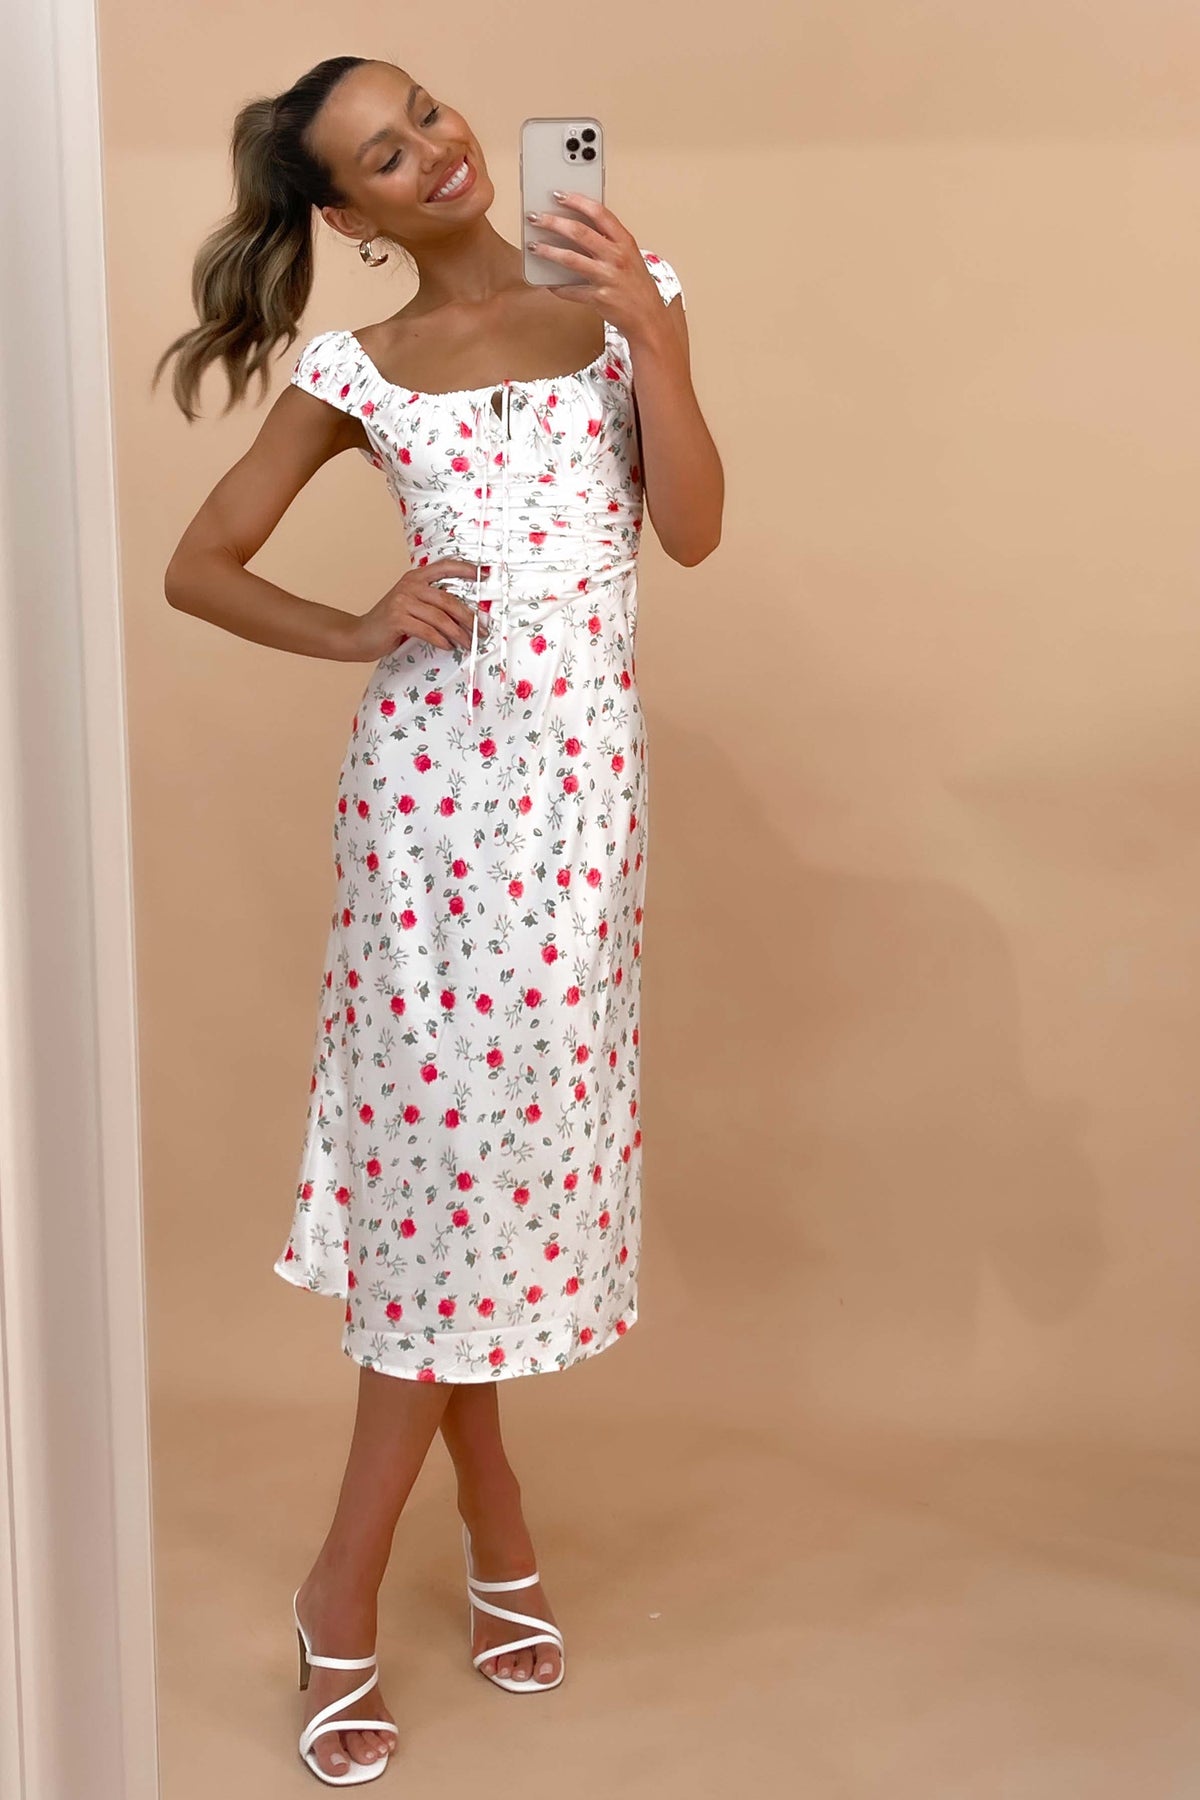 Titian Dress, BODYCON, DRESS, DRESSES, FLORAL, FLORALS, MIDI DRESS, new arrivals, OFF SHOULDER, POLYESTER &amp; RAYON &amp; SPANDEX, POLYESTER AND SPANDEX AND RAYON, WHITE, , -MISHKAH